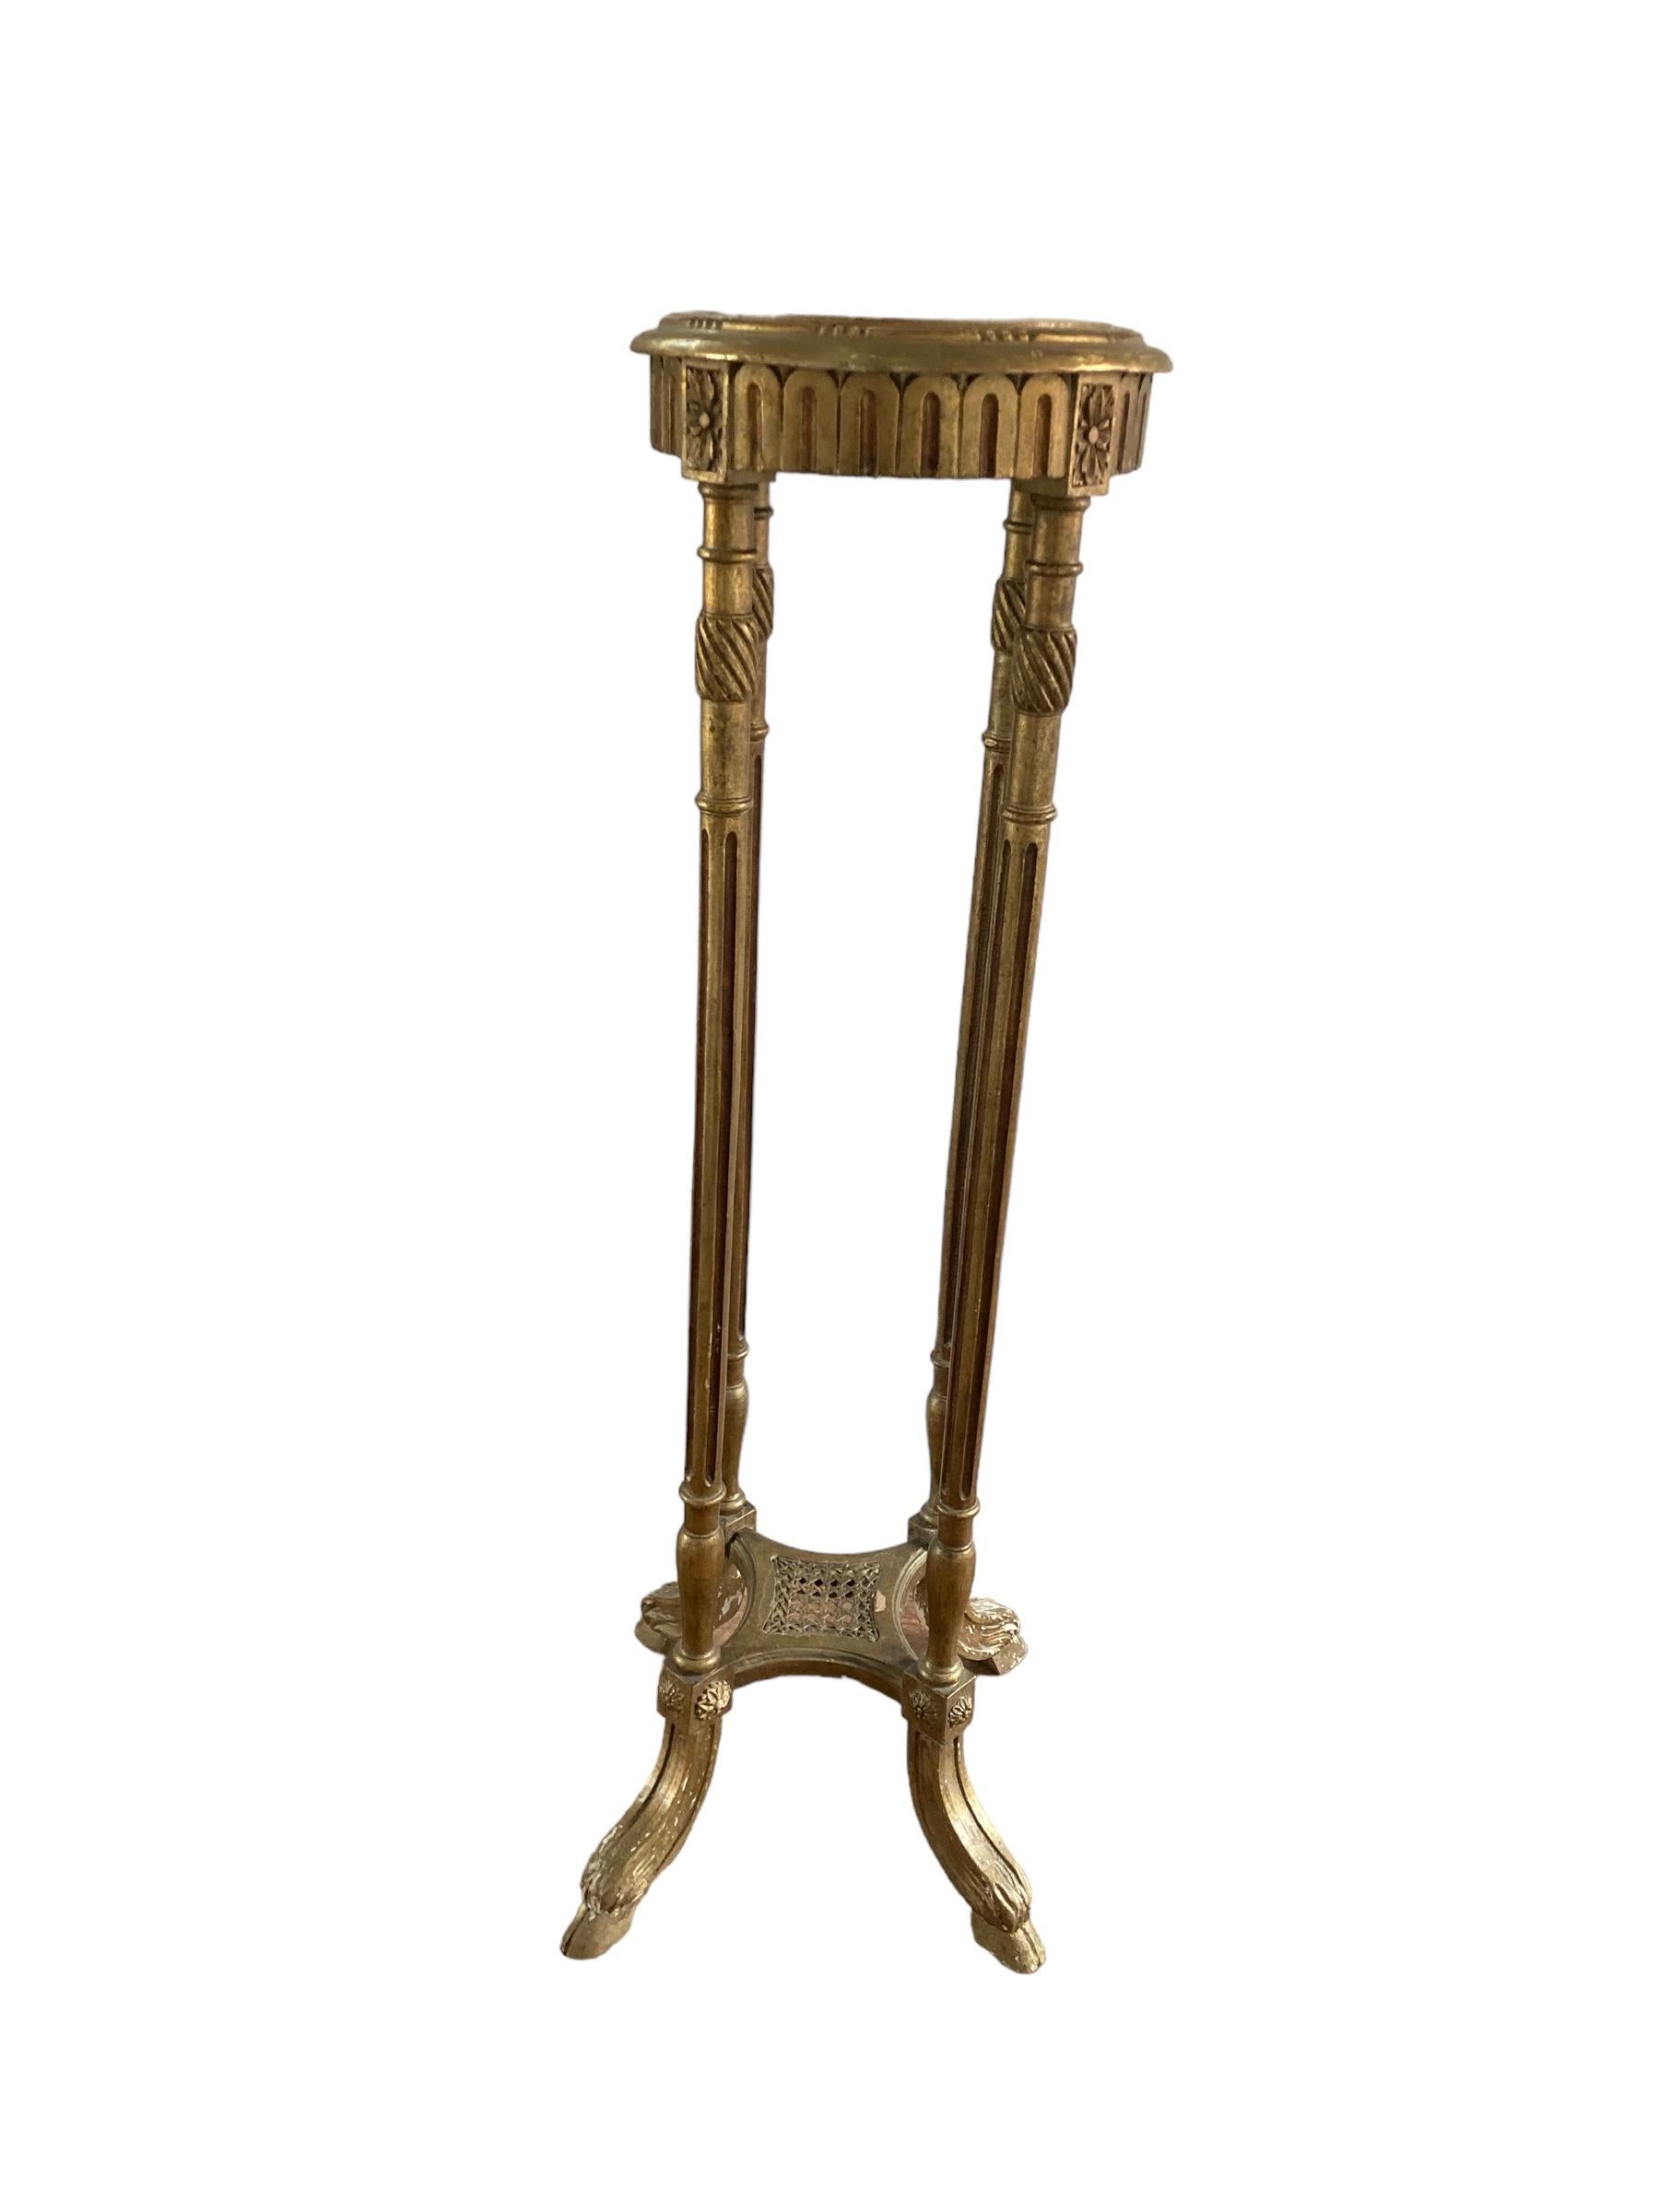 Rococo French Louis XIV Style, giltwood marble top pedestal with decorative details For Sale